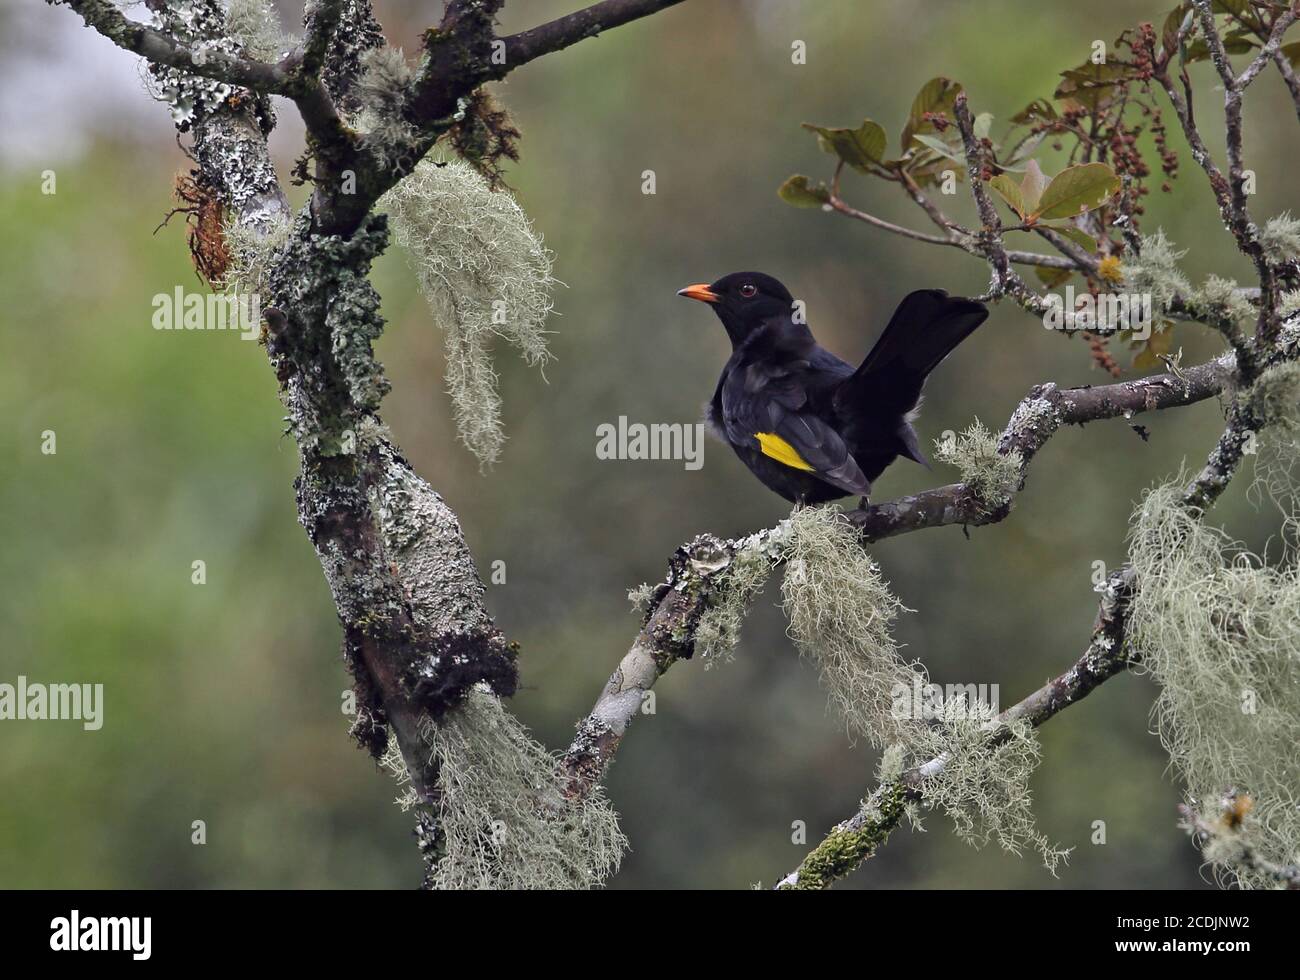 Black-and-gold Cotinga (Tijuca atra) adult male perched on branch with tail cocked   Atlantic Rainforest, Brazil    June Stock Photo